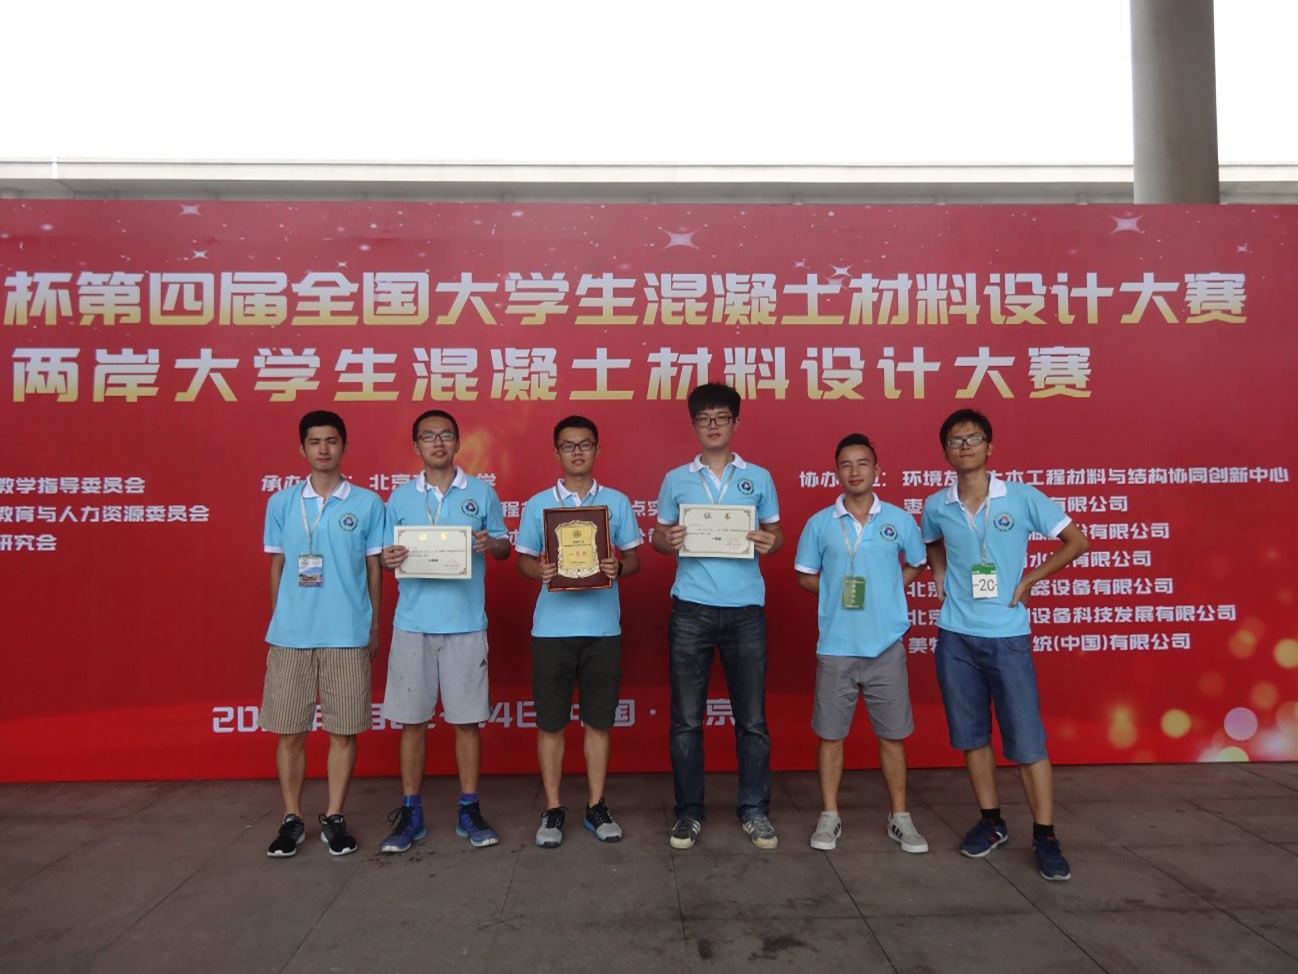 Xiamen University teams highlighted at the “Fourth Subote Cup Cement Designing” 